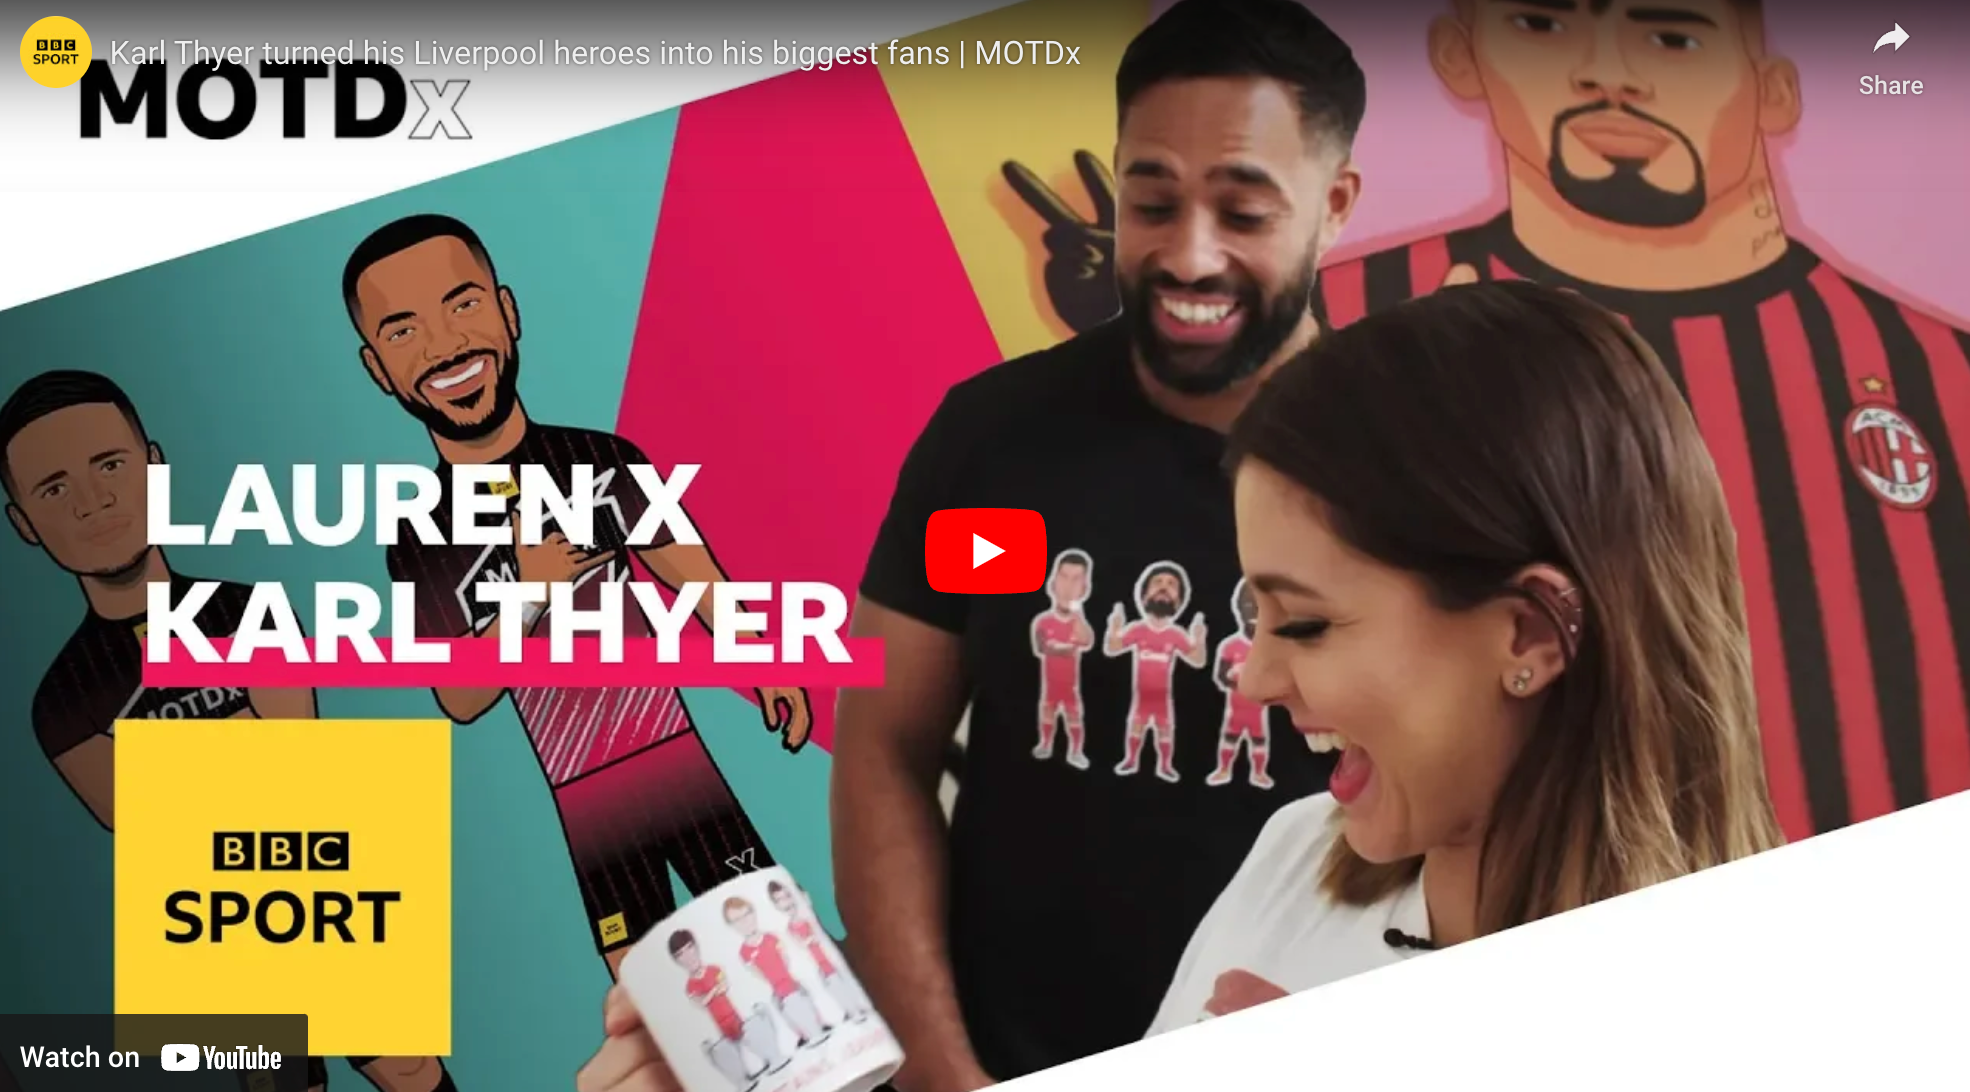 Load video: MOTDx meets illustrator Karl Thyer whose passion for drawing his Liverpool heroes like Mo Salah, Virgil van Dijk and Jurgen Klopp led to them becoming some of his biggest fans.